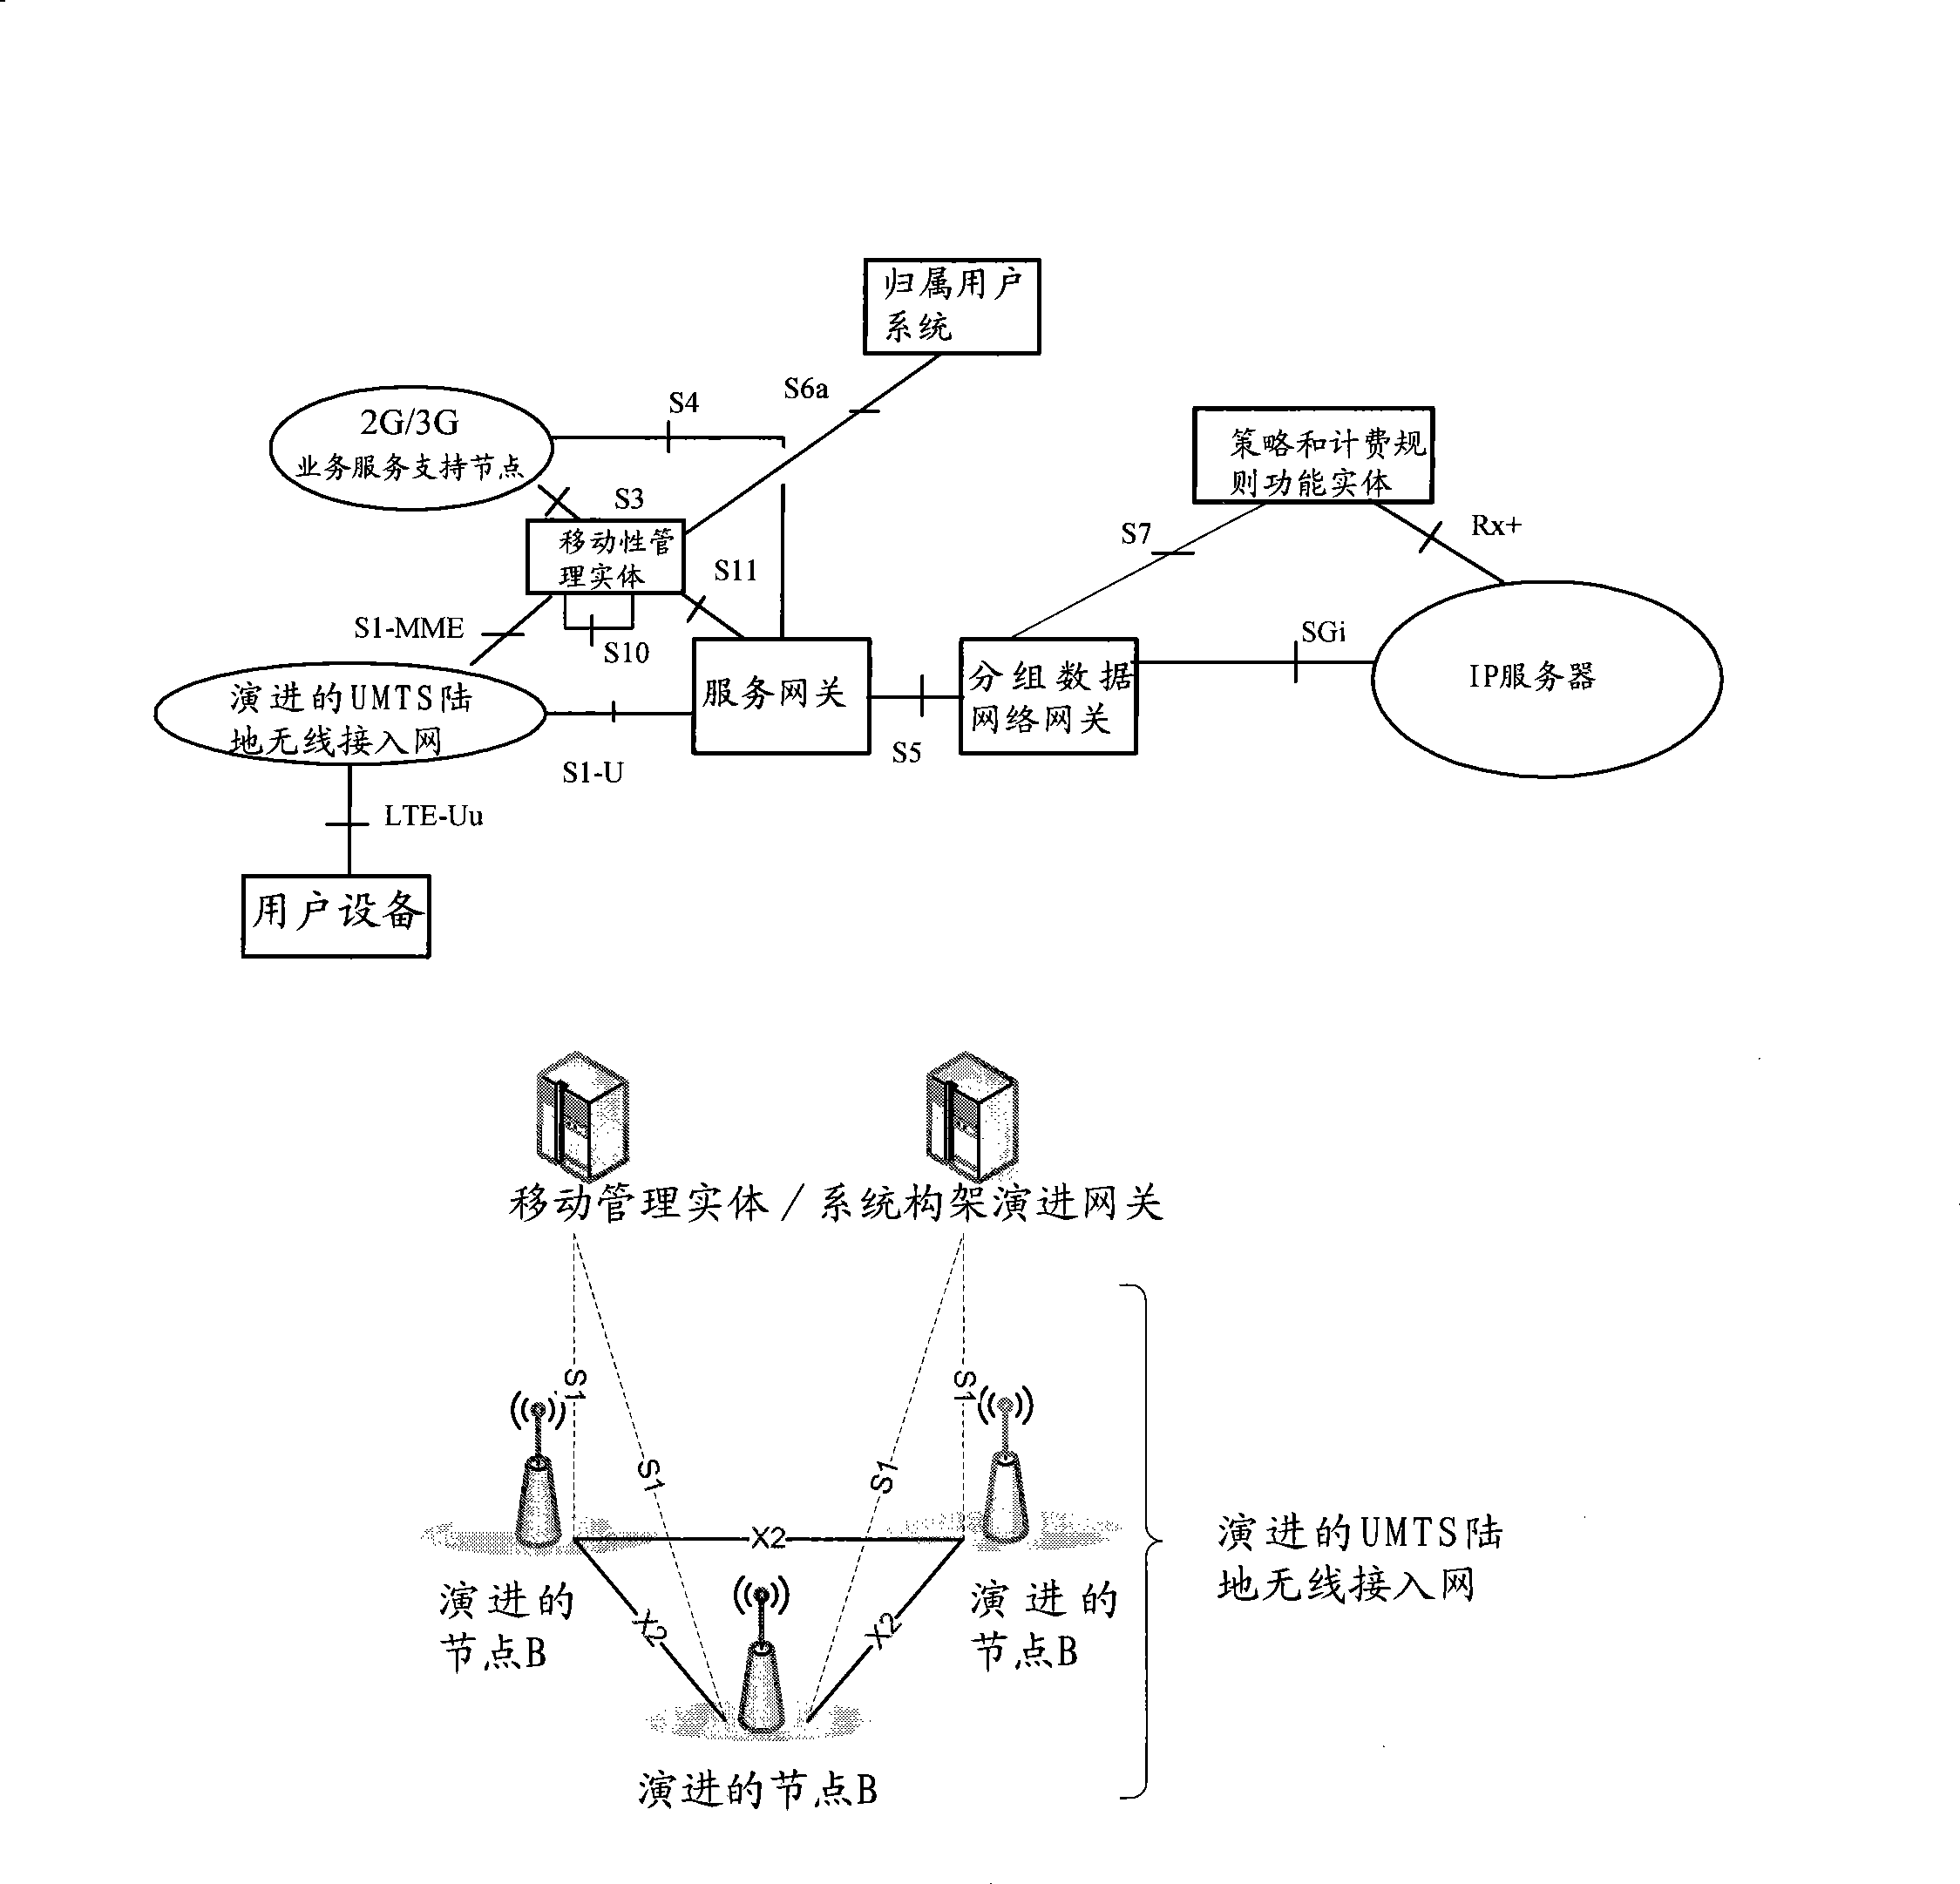 Method and system for communication service switching